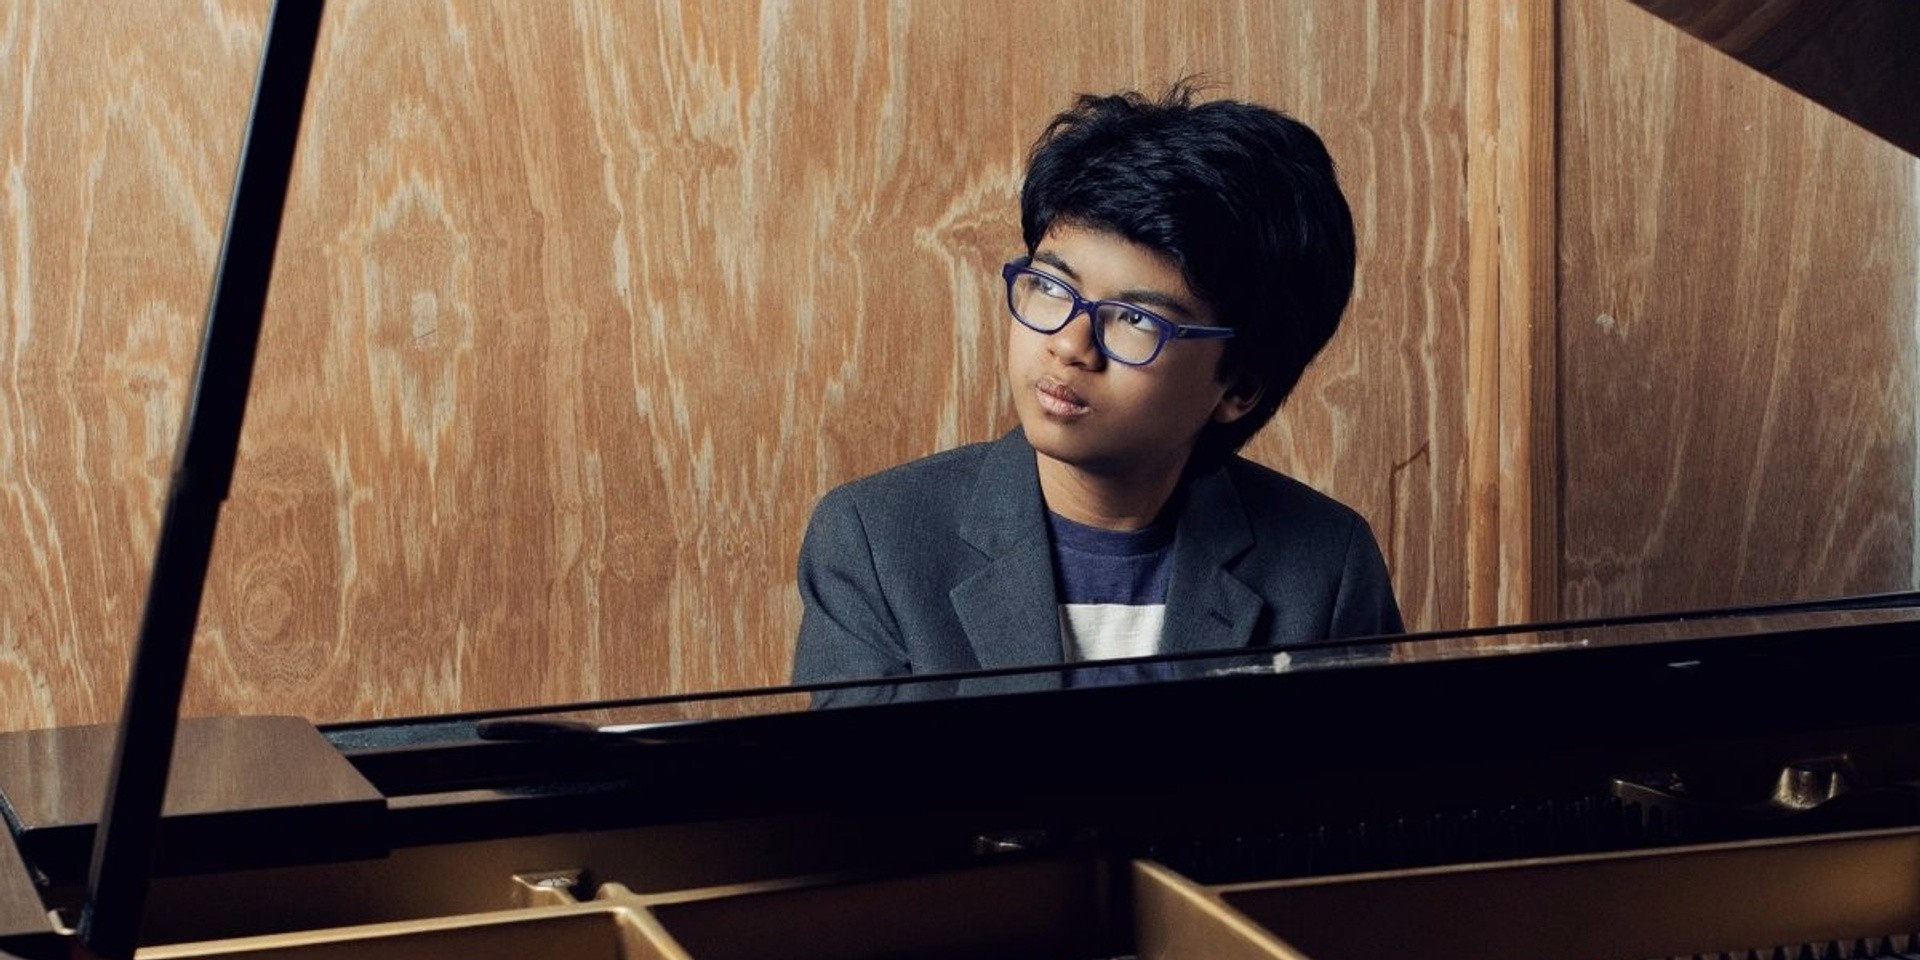 Joey Alexander, Indonesian jazz piano prodigy, is set to perform in Singapore